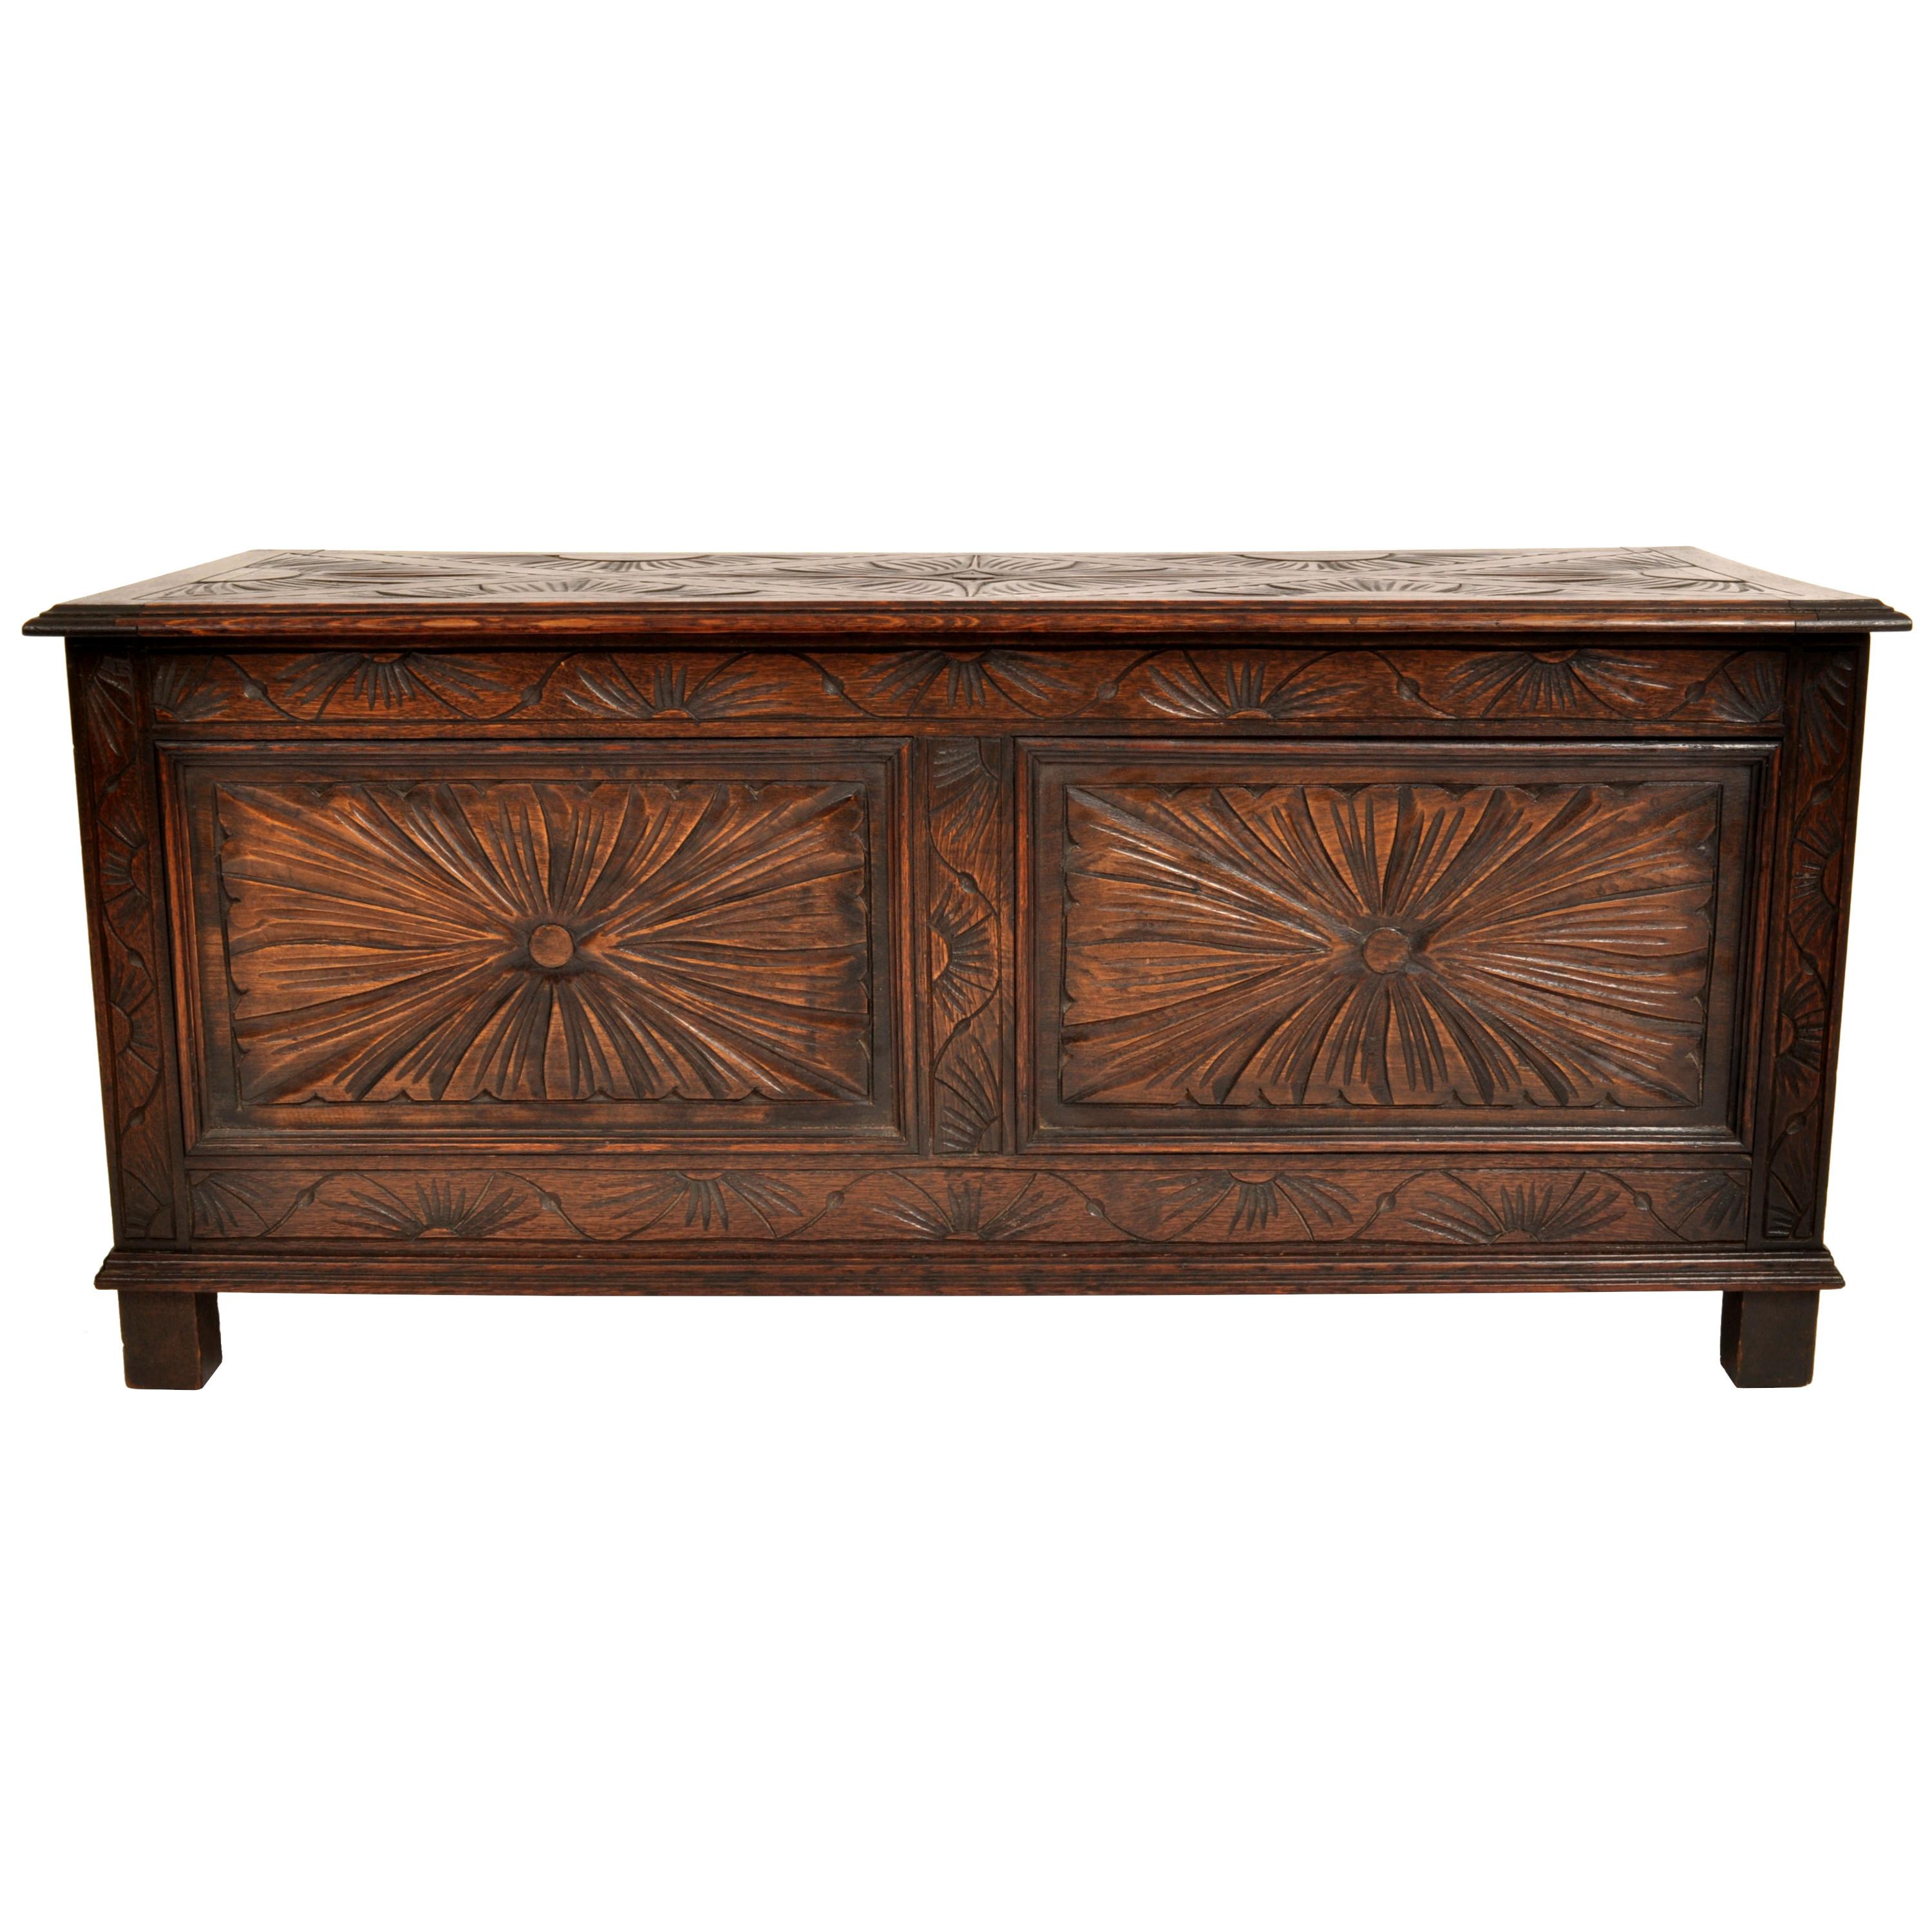 Early 20th Century Antique English Arts & Crafts Carved Oak Coffer Blanket Chest Window Seat 1900 For Sale